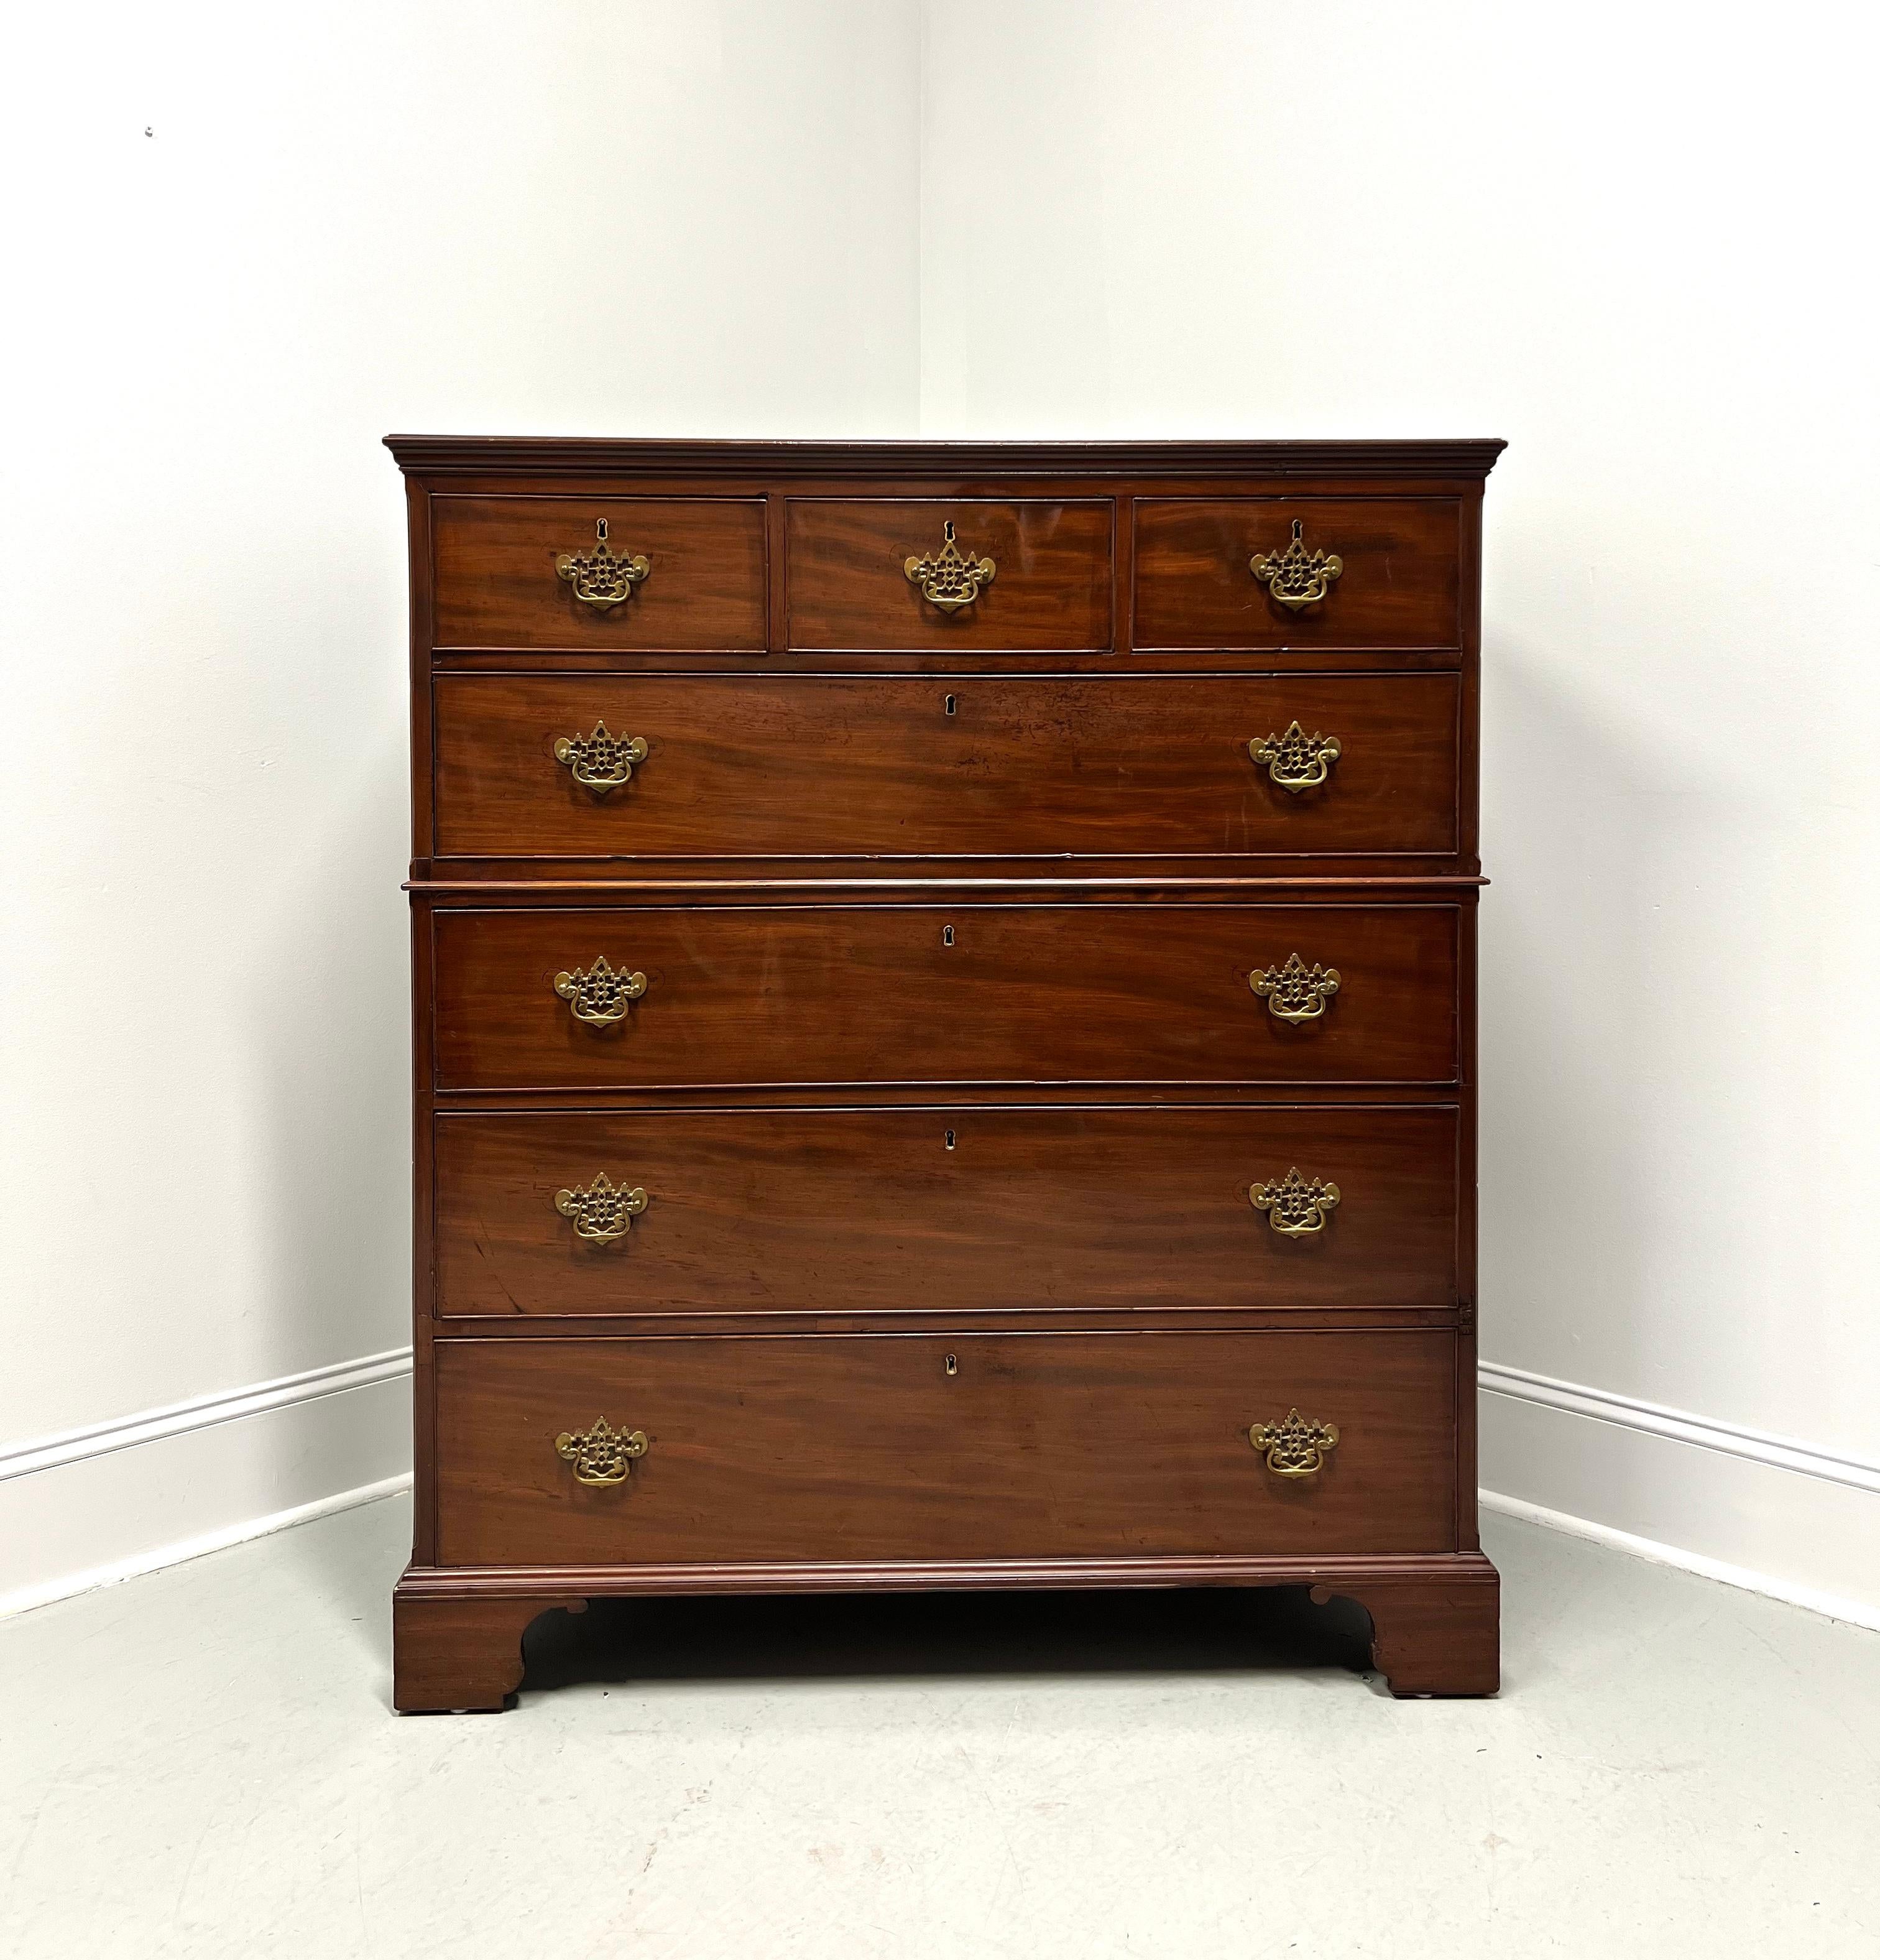 An antique 18th Century extra-large chest on chest of drawers in the  Chippendale style, unbranded. Mahogany with brass hardware, bevel edge to the top, bevel edge dividing chests, and bracket feet. Features three smaller over one larger drawer to